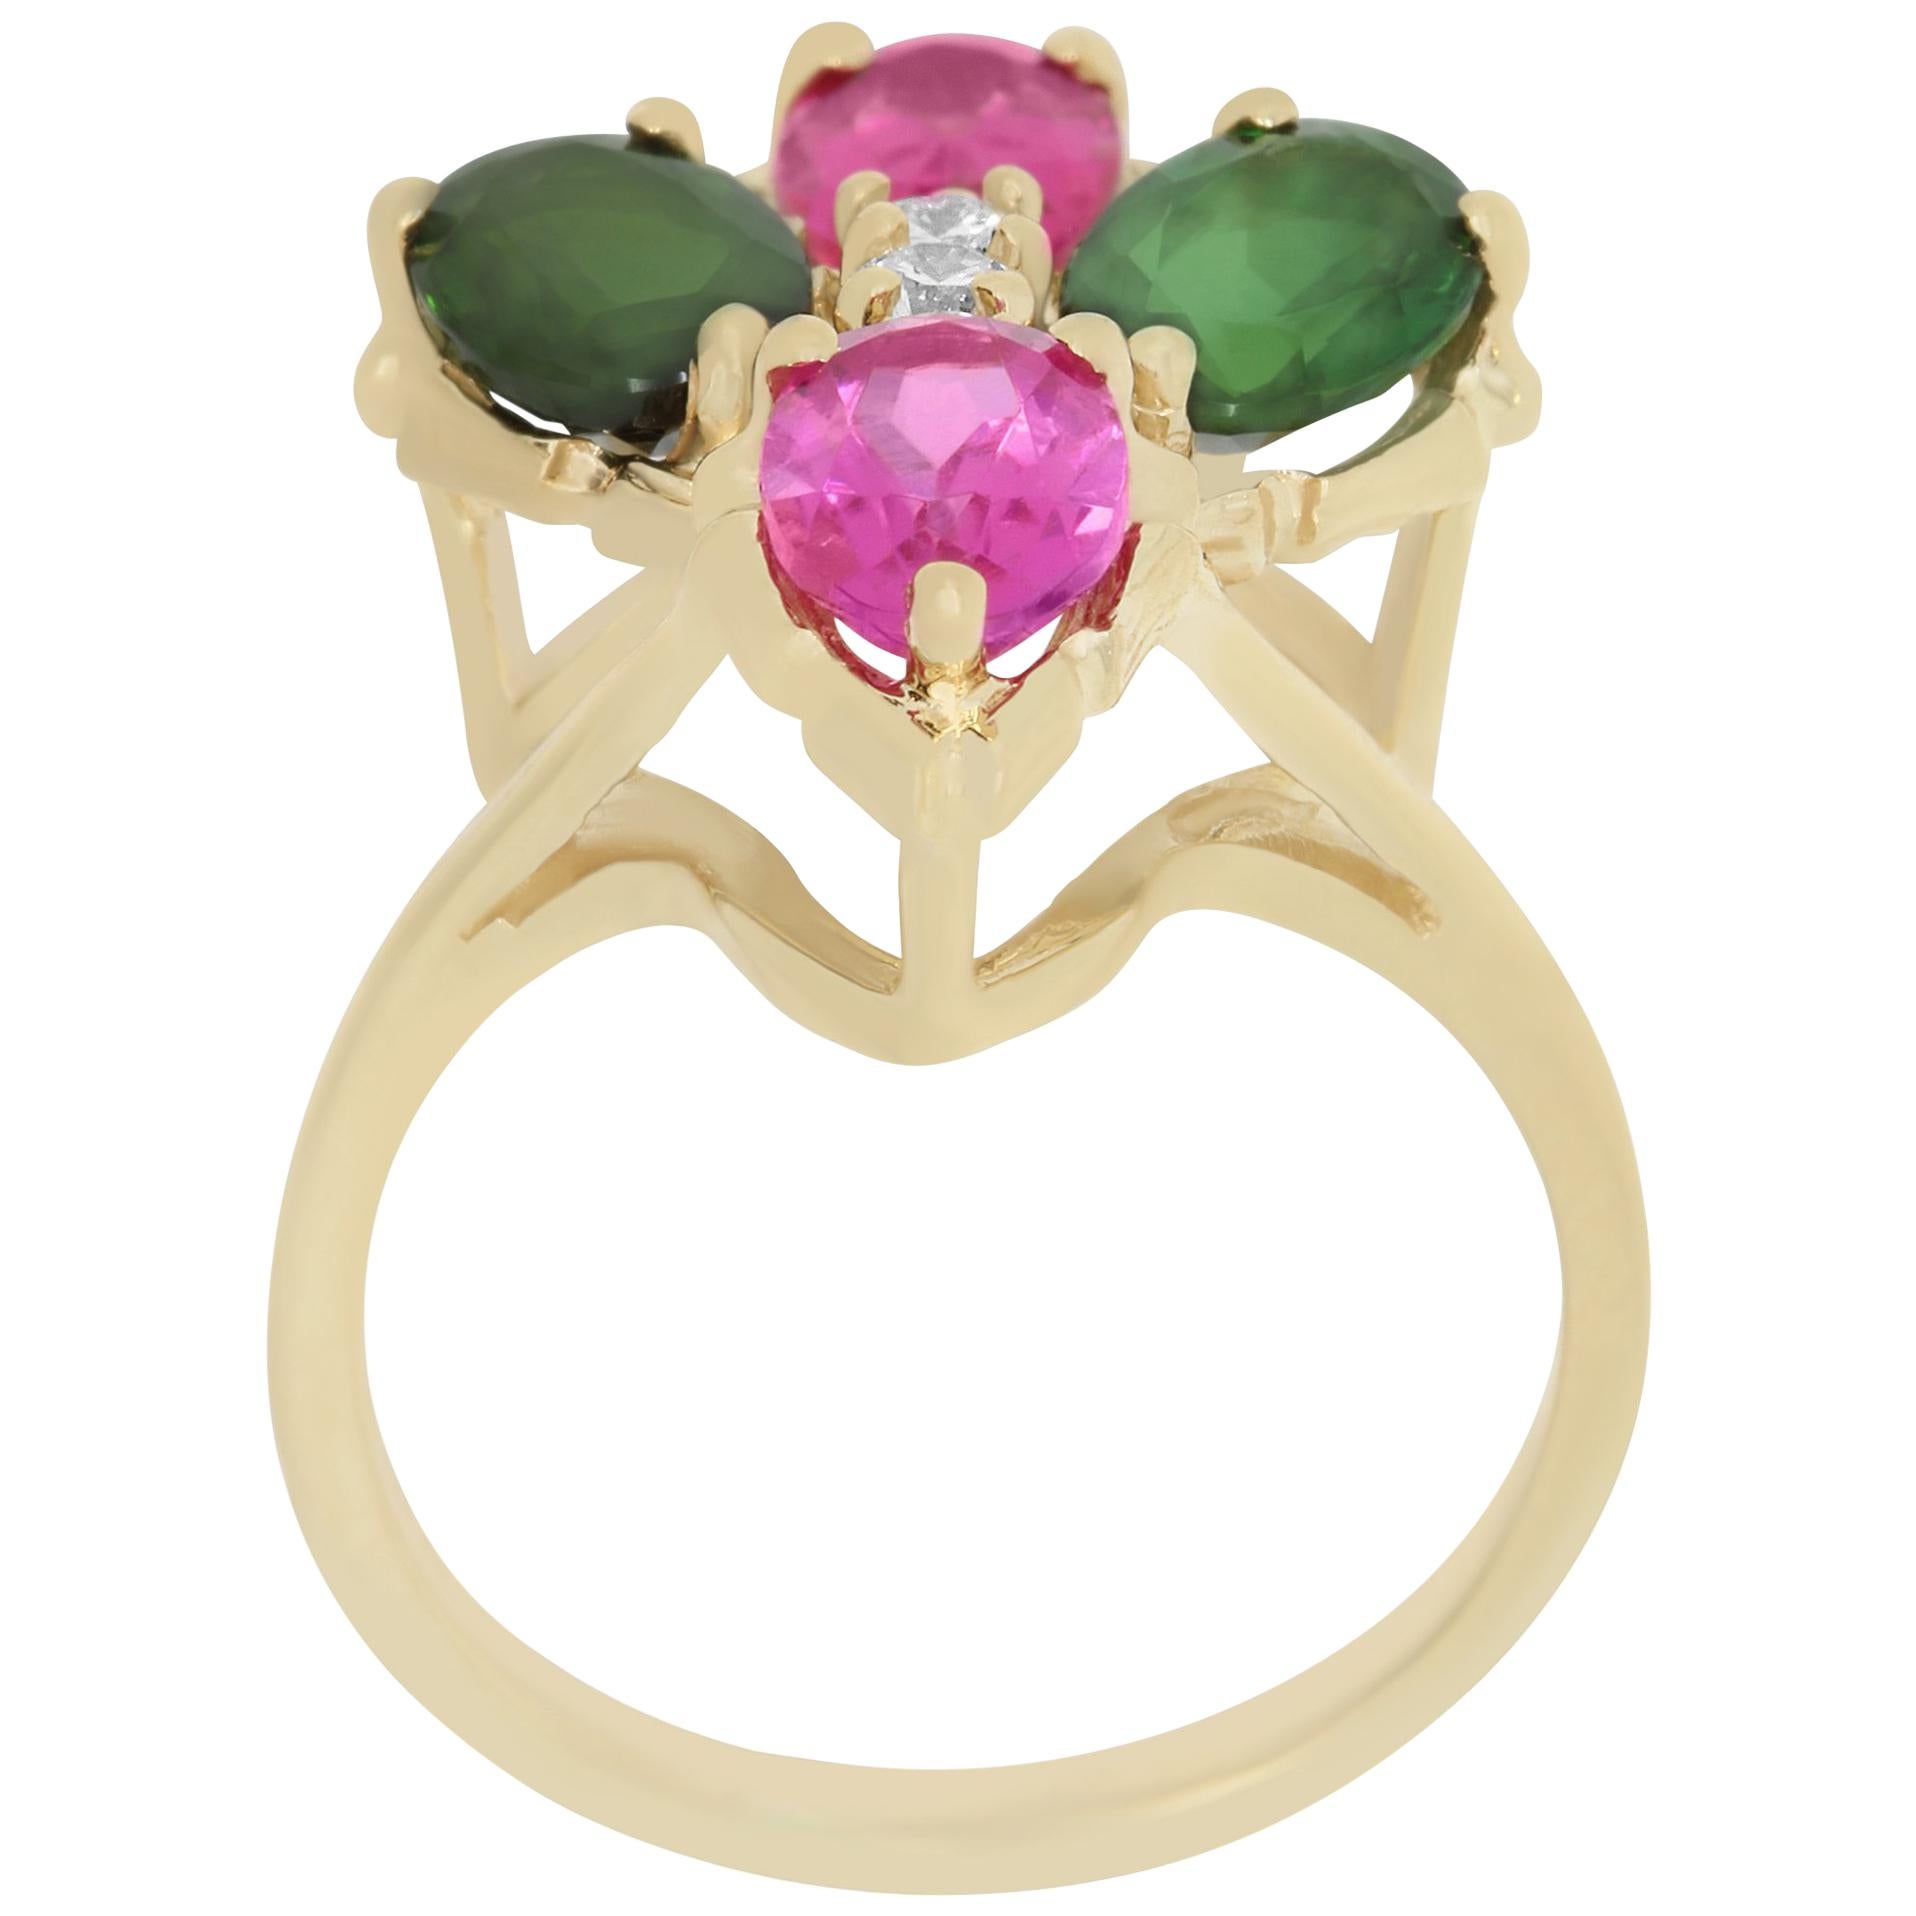 Take a bite out of summer with this unique Tourmaline Ring! Featuring both Green and Pink Oval Shaped Tourmaline complemented with Brilliant White Diamonds, this is a must have!

Material: 14K Yellow Gold
Center Stone Details: 2 Oval Green